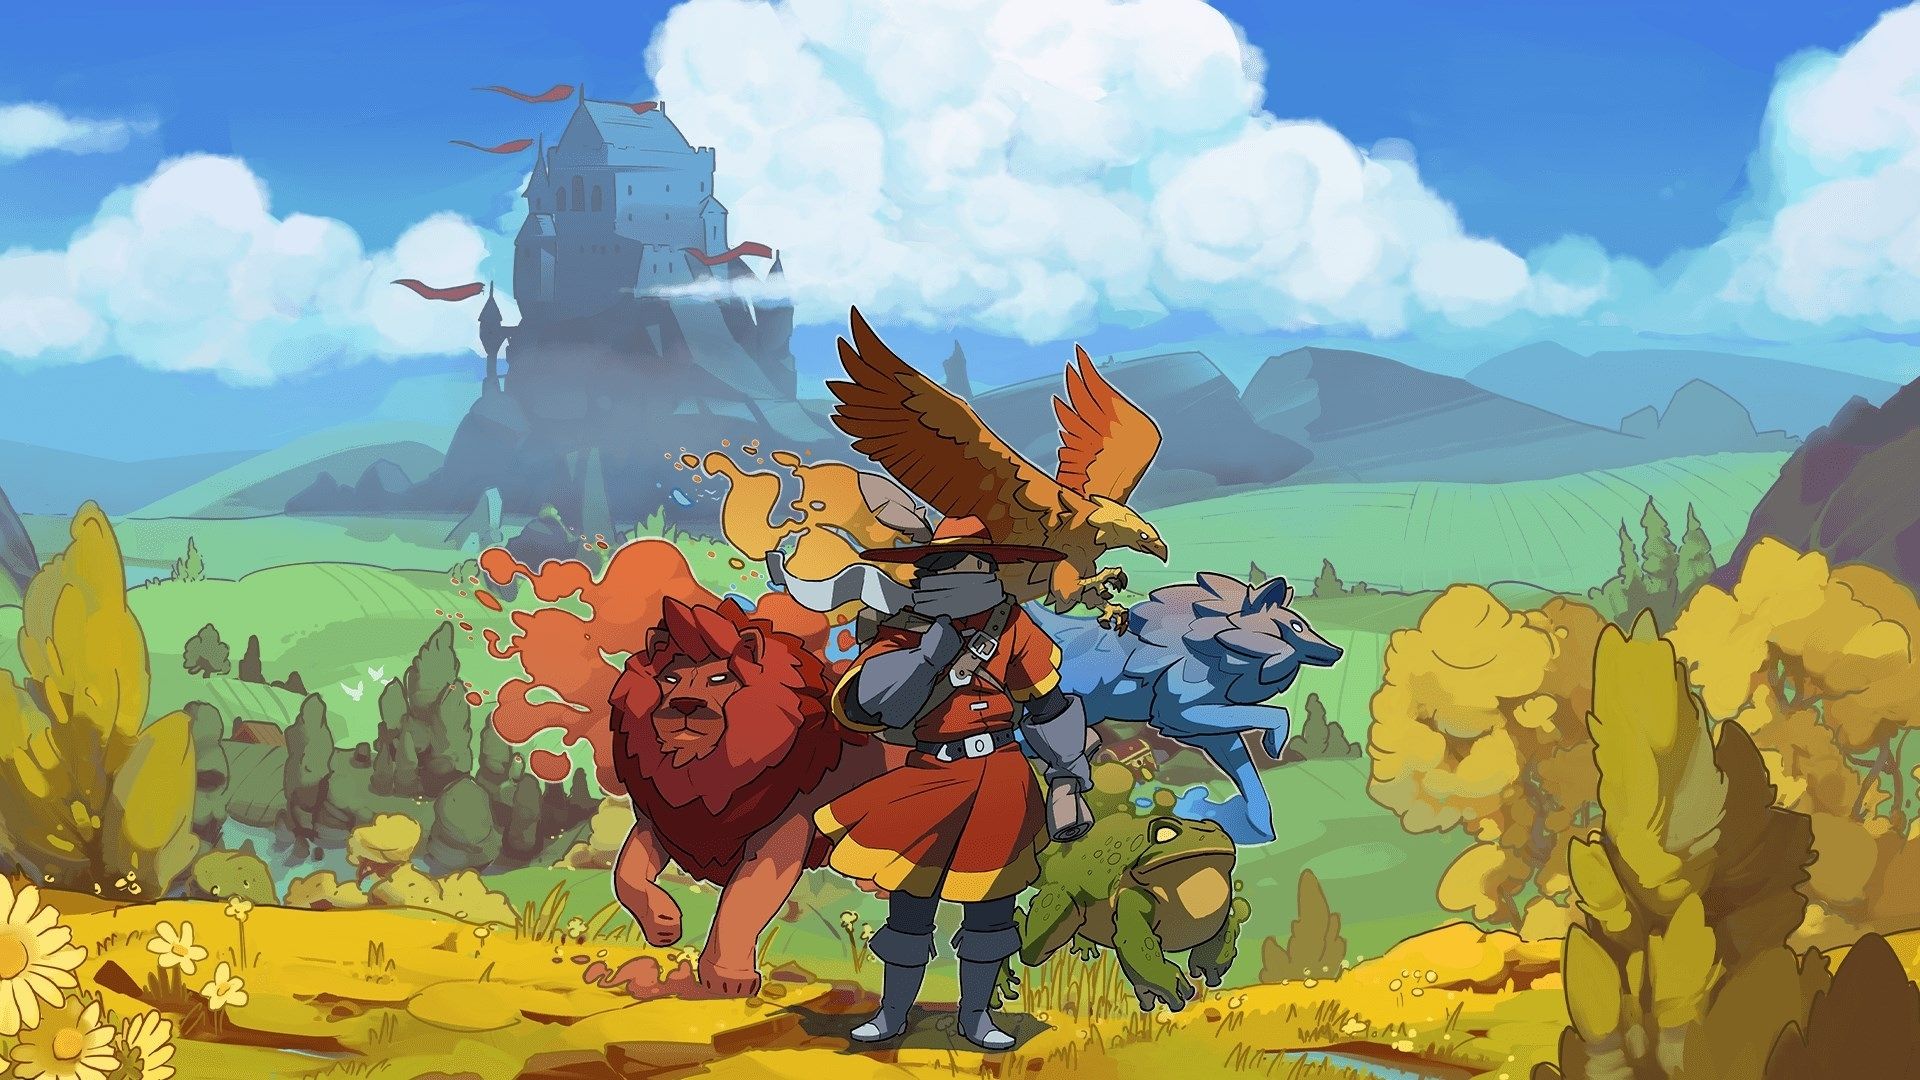 Art for the game Monster Sanctuary, a game like Pokémon, featuring a character and a large lion-like animal looking out to a verdant distance.